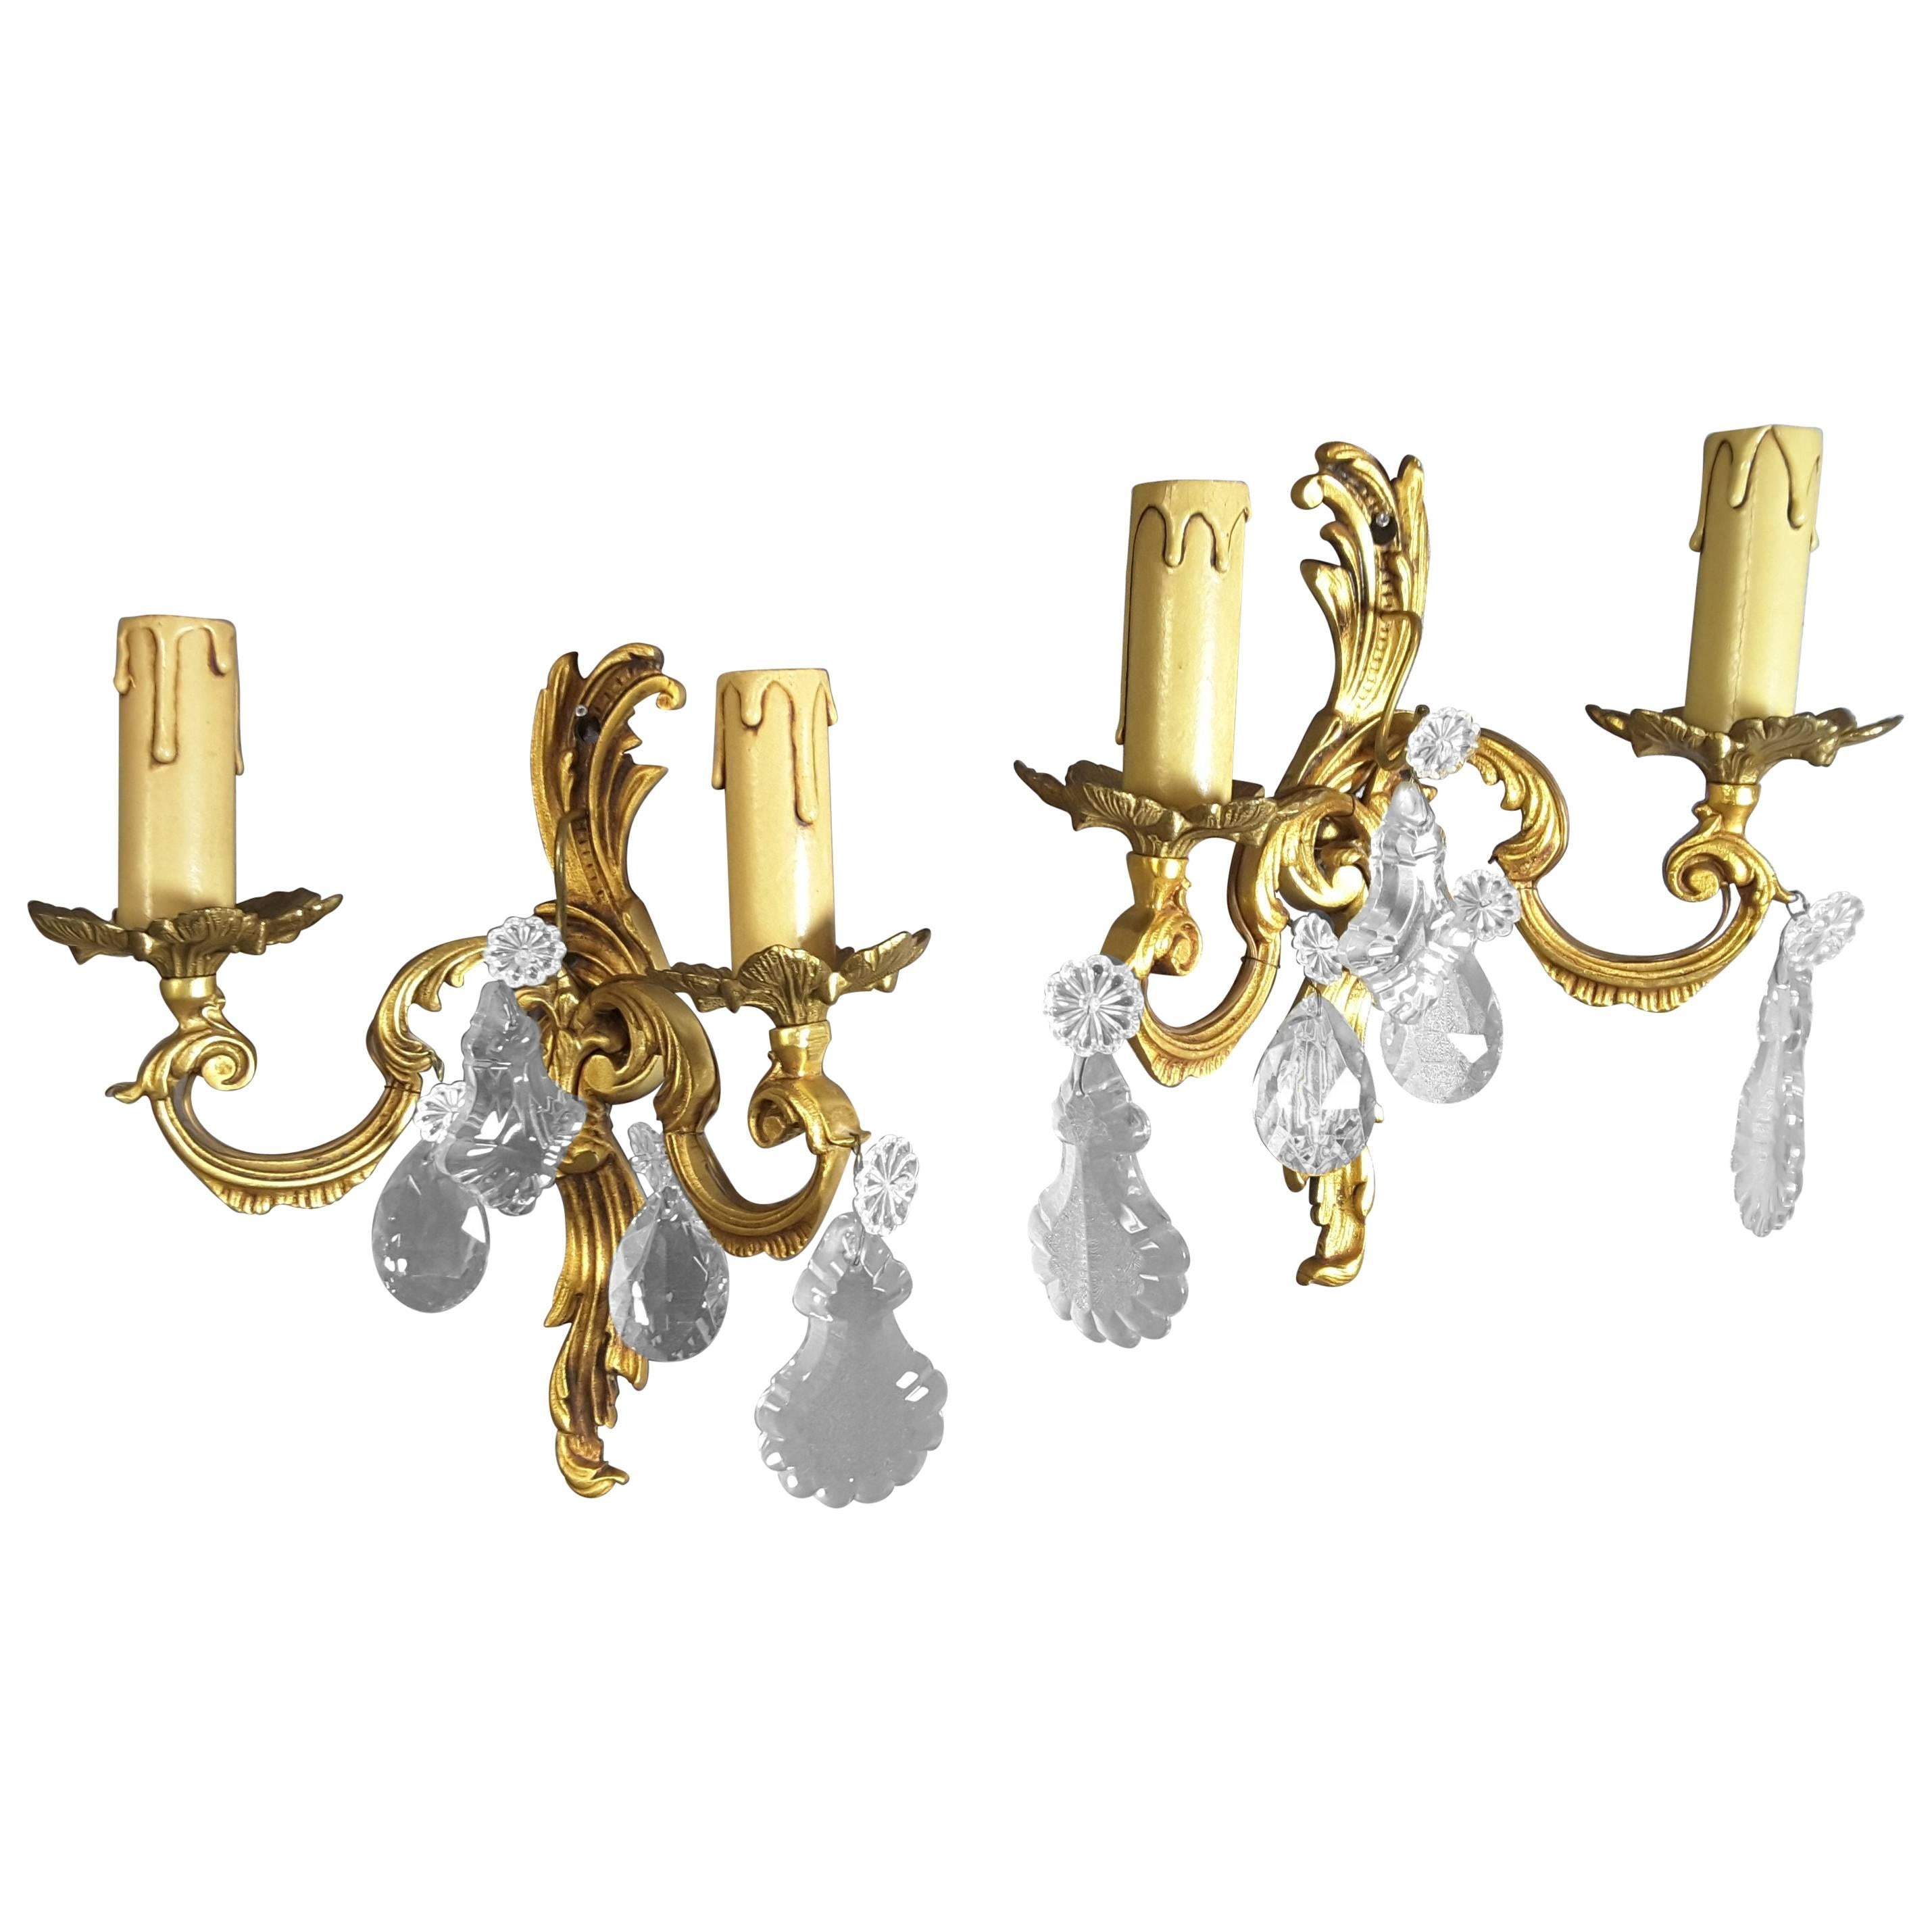 Pair of Brass/Gilt Wall Sconces with Floral Crystals